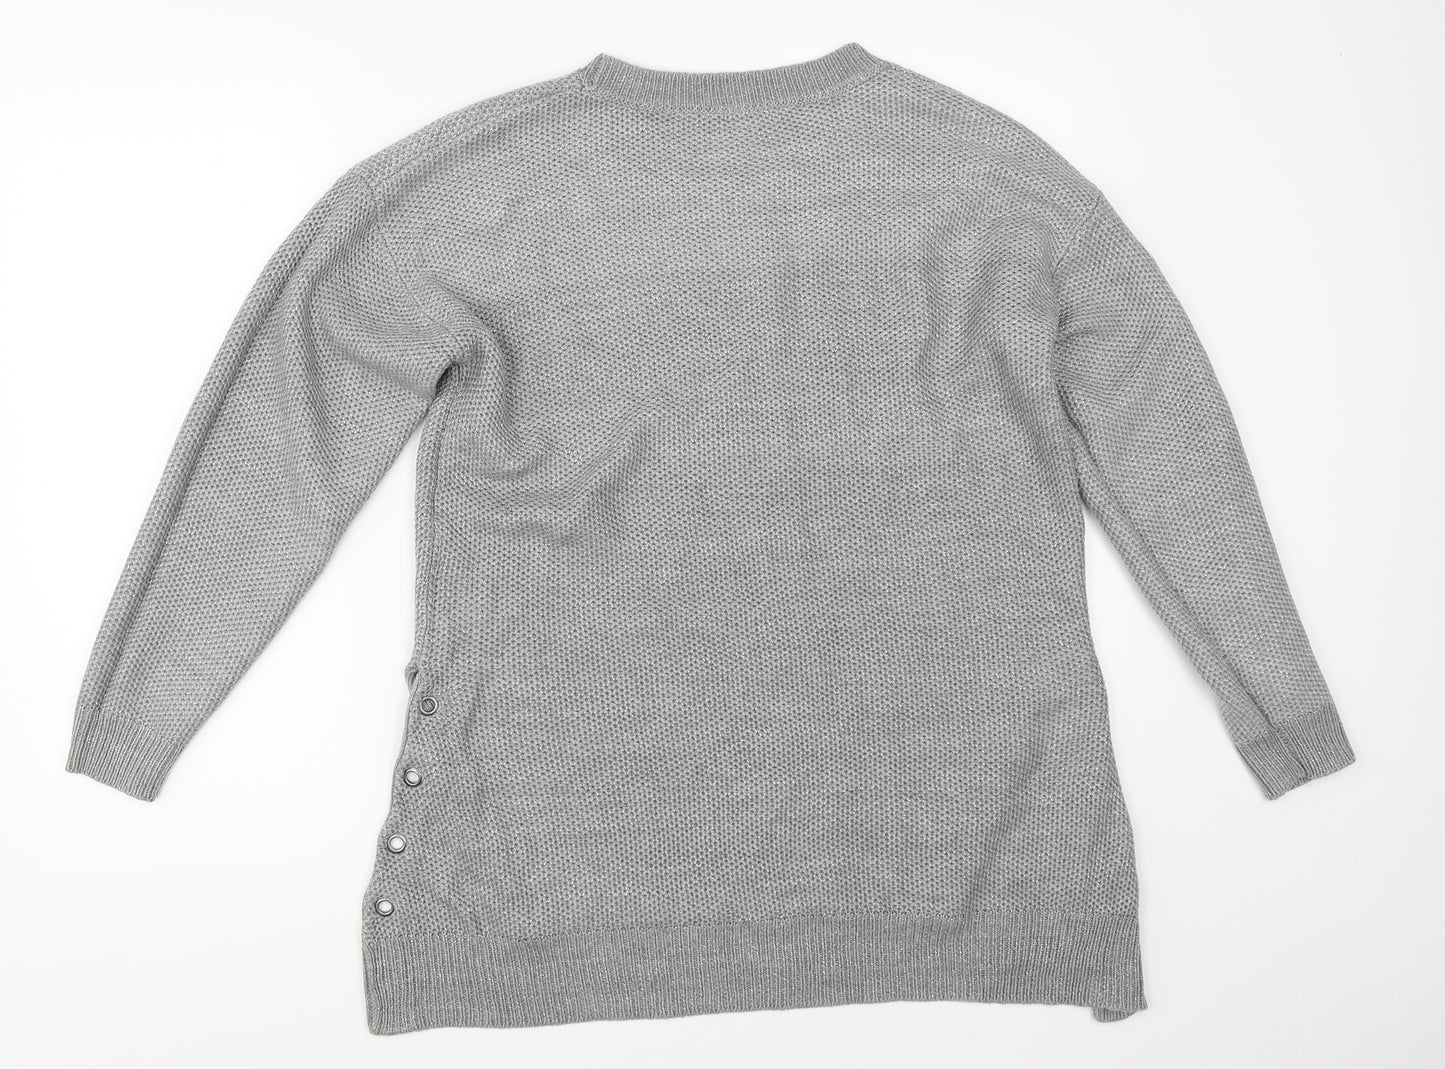 Tango Womens Grey   Pullover Jumper Size M